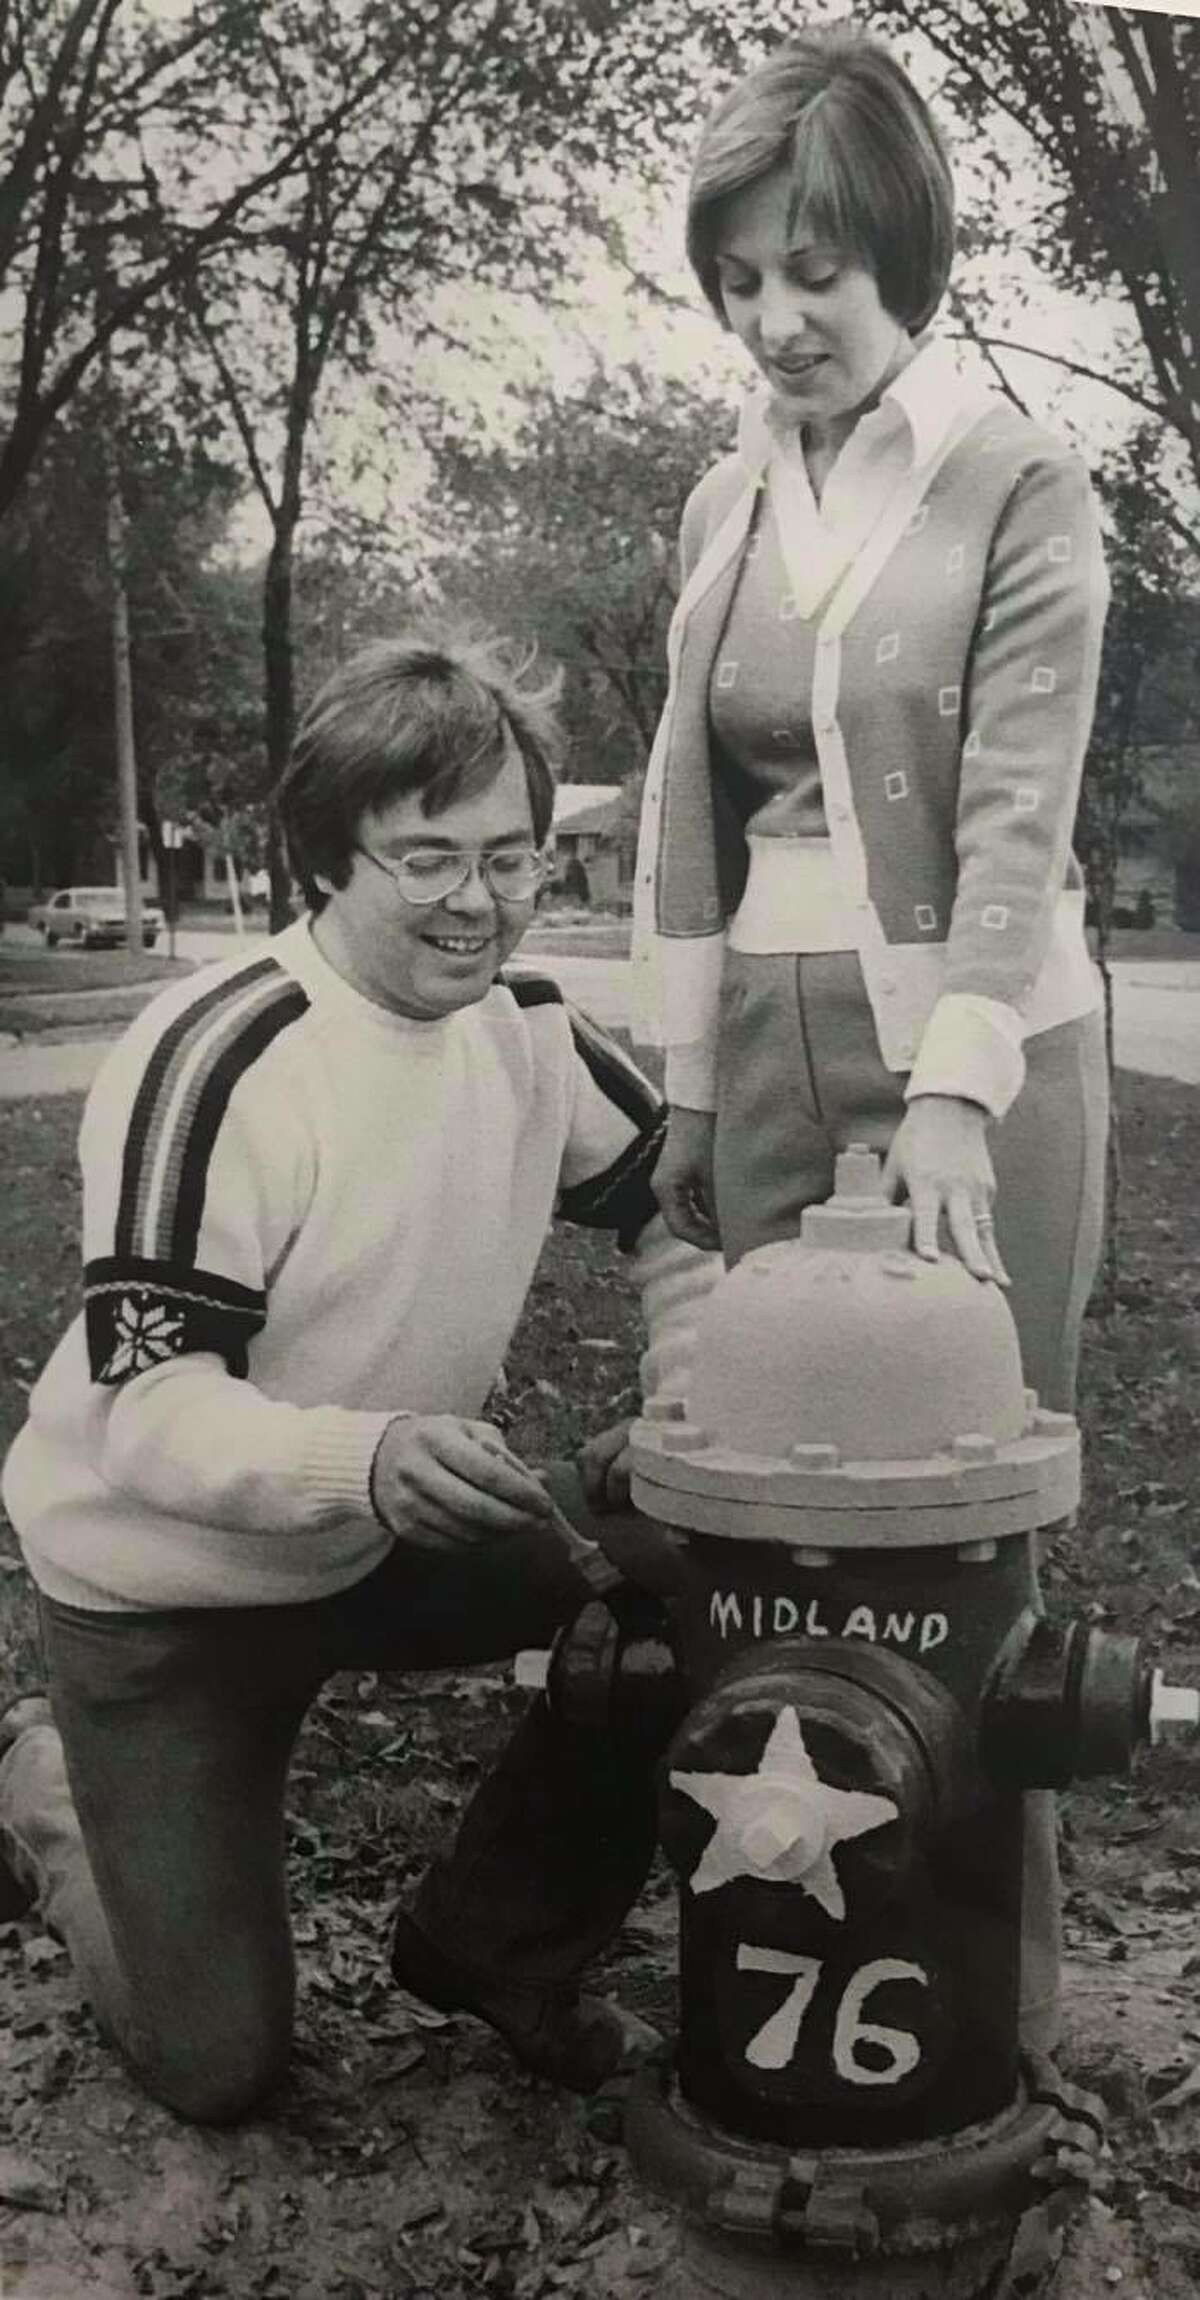 Stephen J. Engelken, administrative assistant for the Midland Community Affairs Council, paints the first hydrant in advance of the Bicentennial Fire Hydrant Painting Contest sponsored by Women's Optimist League. Looking on is Leslie Causgrove, head of the league. October 1975